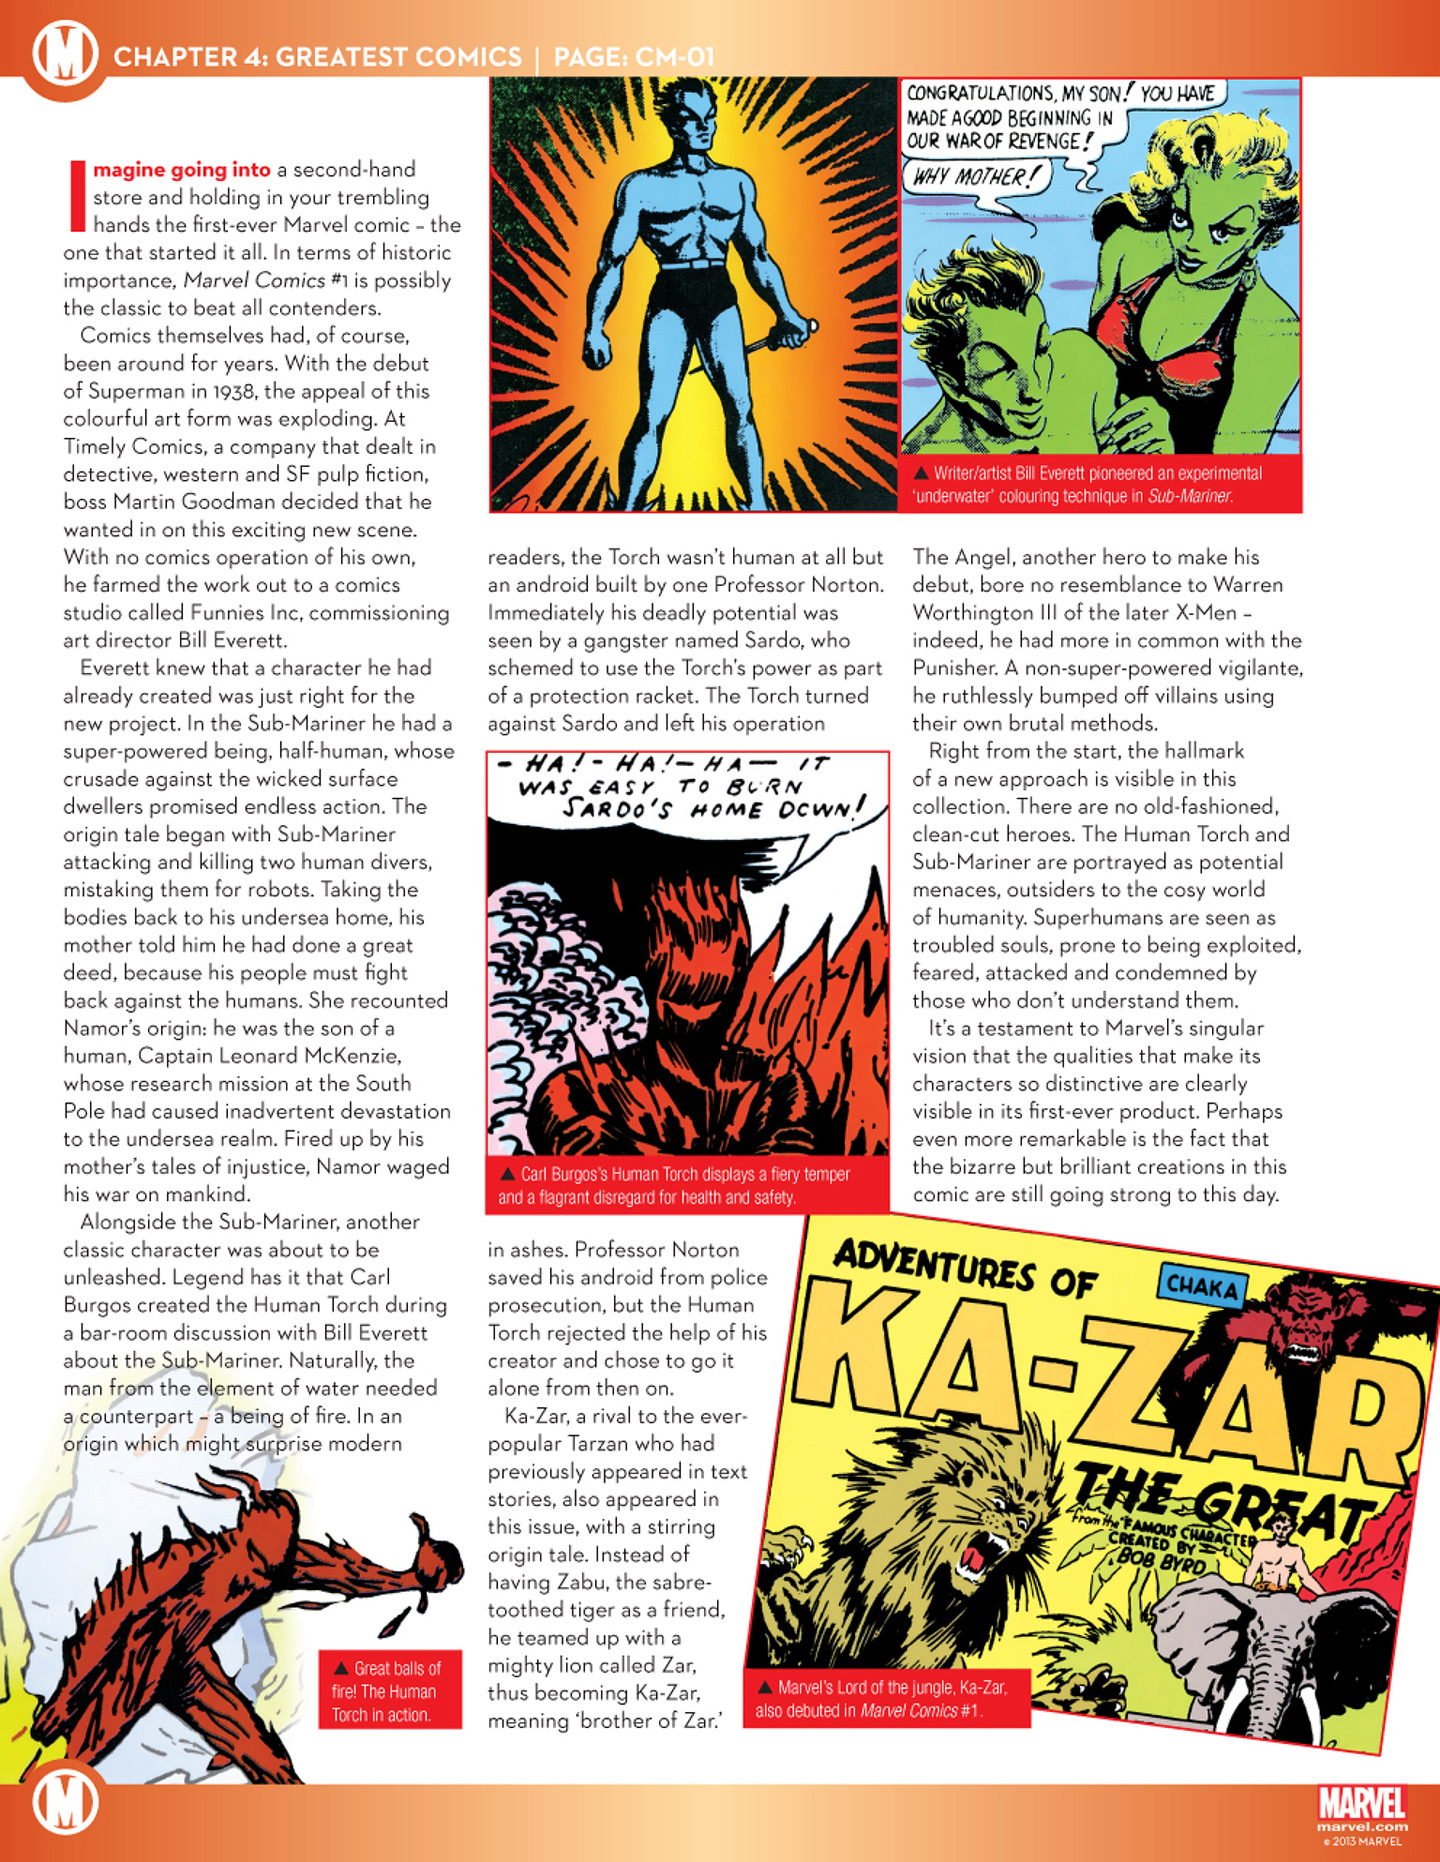 Read online Marvel Fact Files comic -  Issue #41 - 23